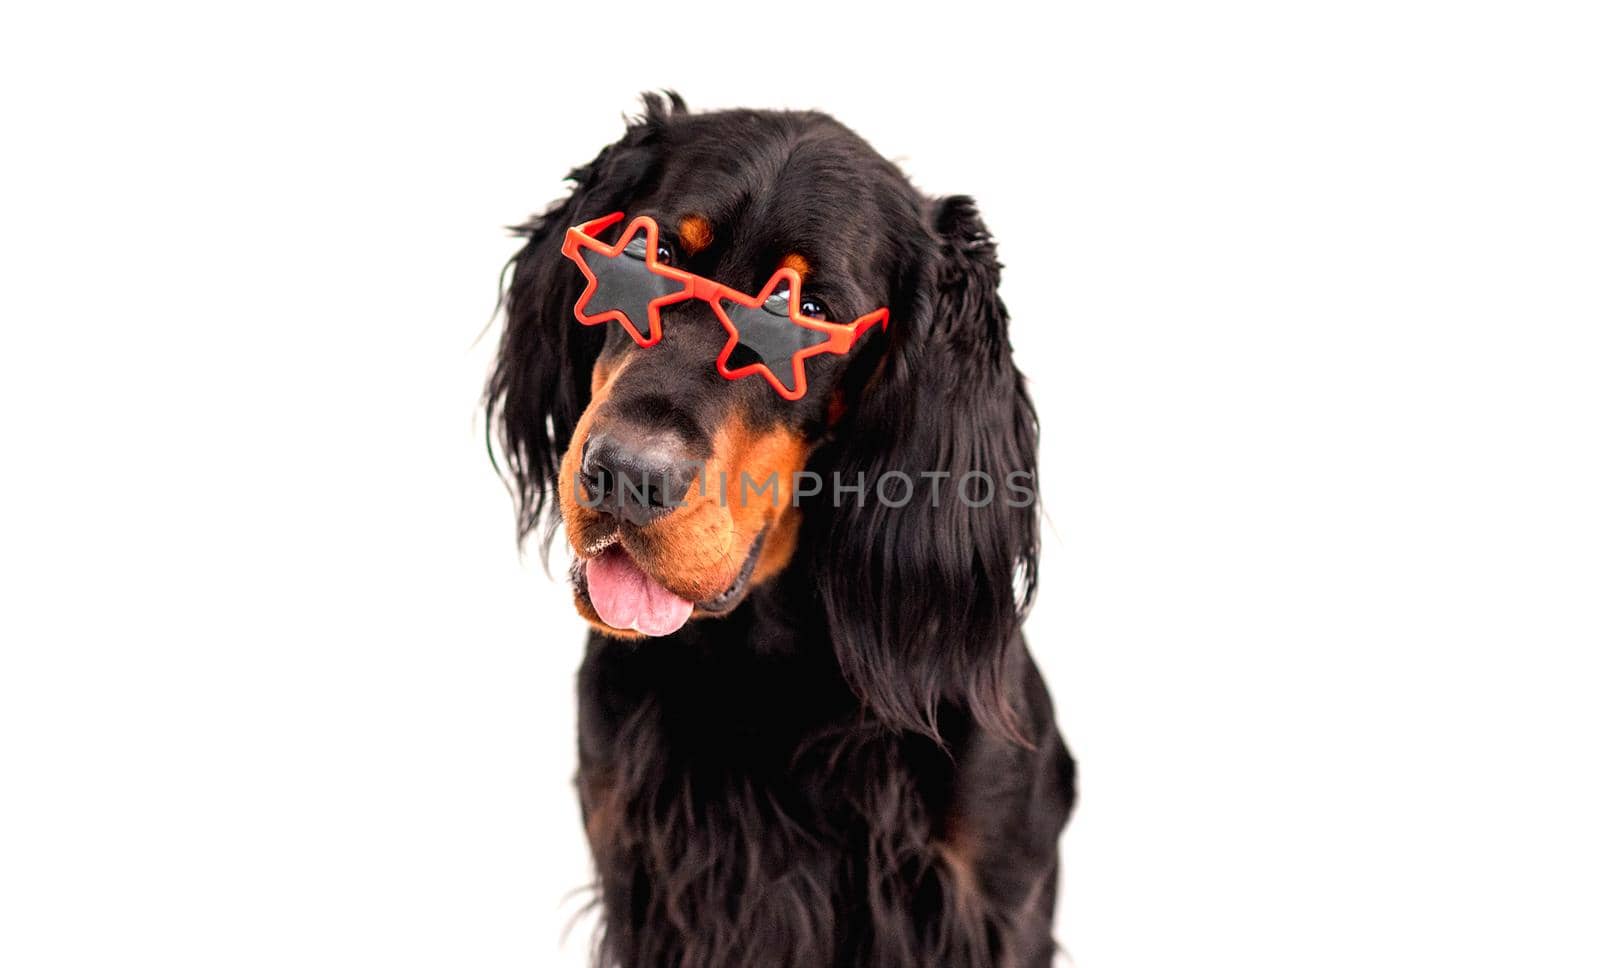 Scottish setter dog wearing red sunglasses looking at camera isolated on white background. Closeup doggy portrait